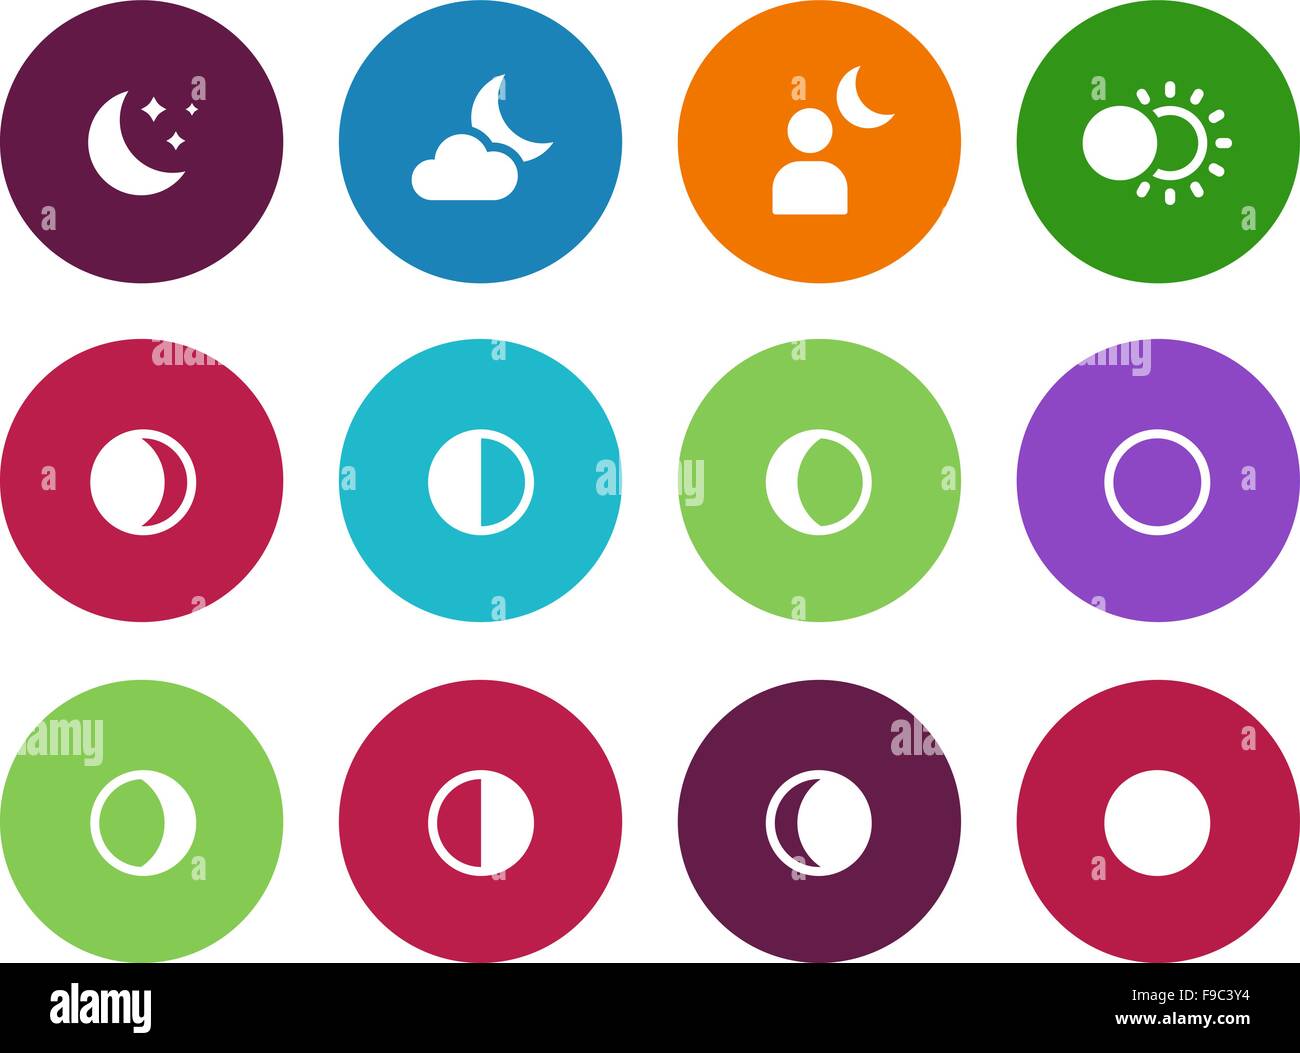 Moon phases circle icons on white background. Stock Vector